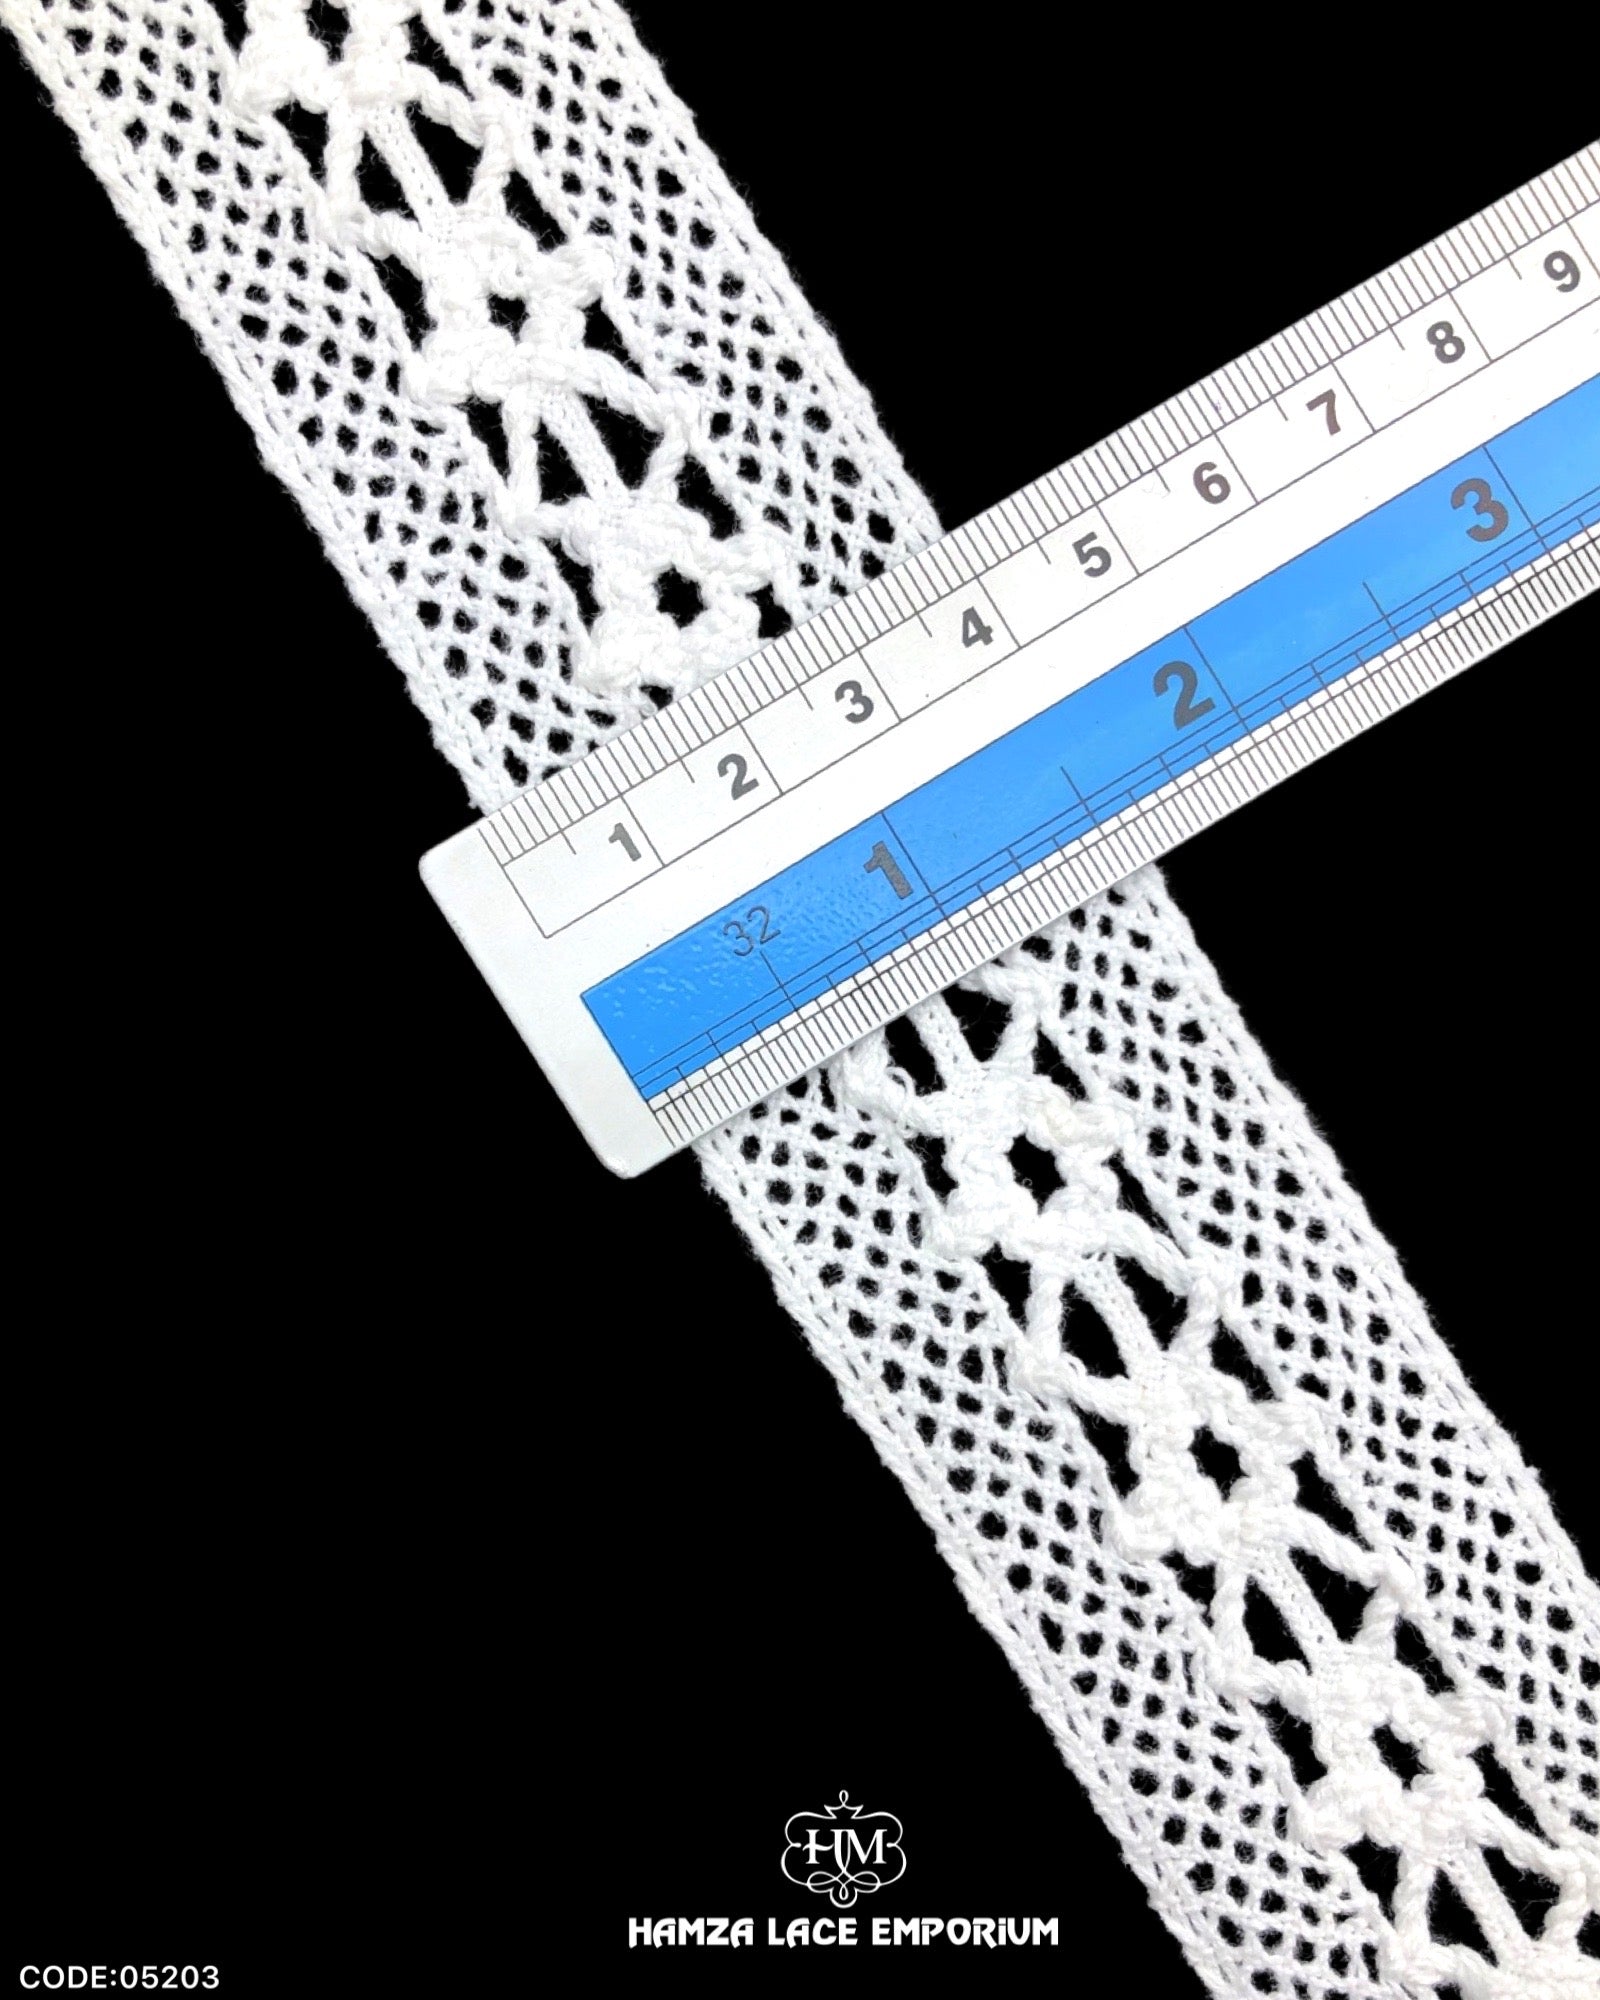 Size of the 'Center Filling Crochet Lace 05203' is shown with the help of a ruler as '1.5' inches